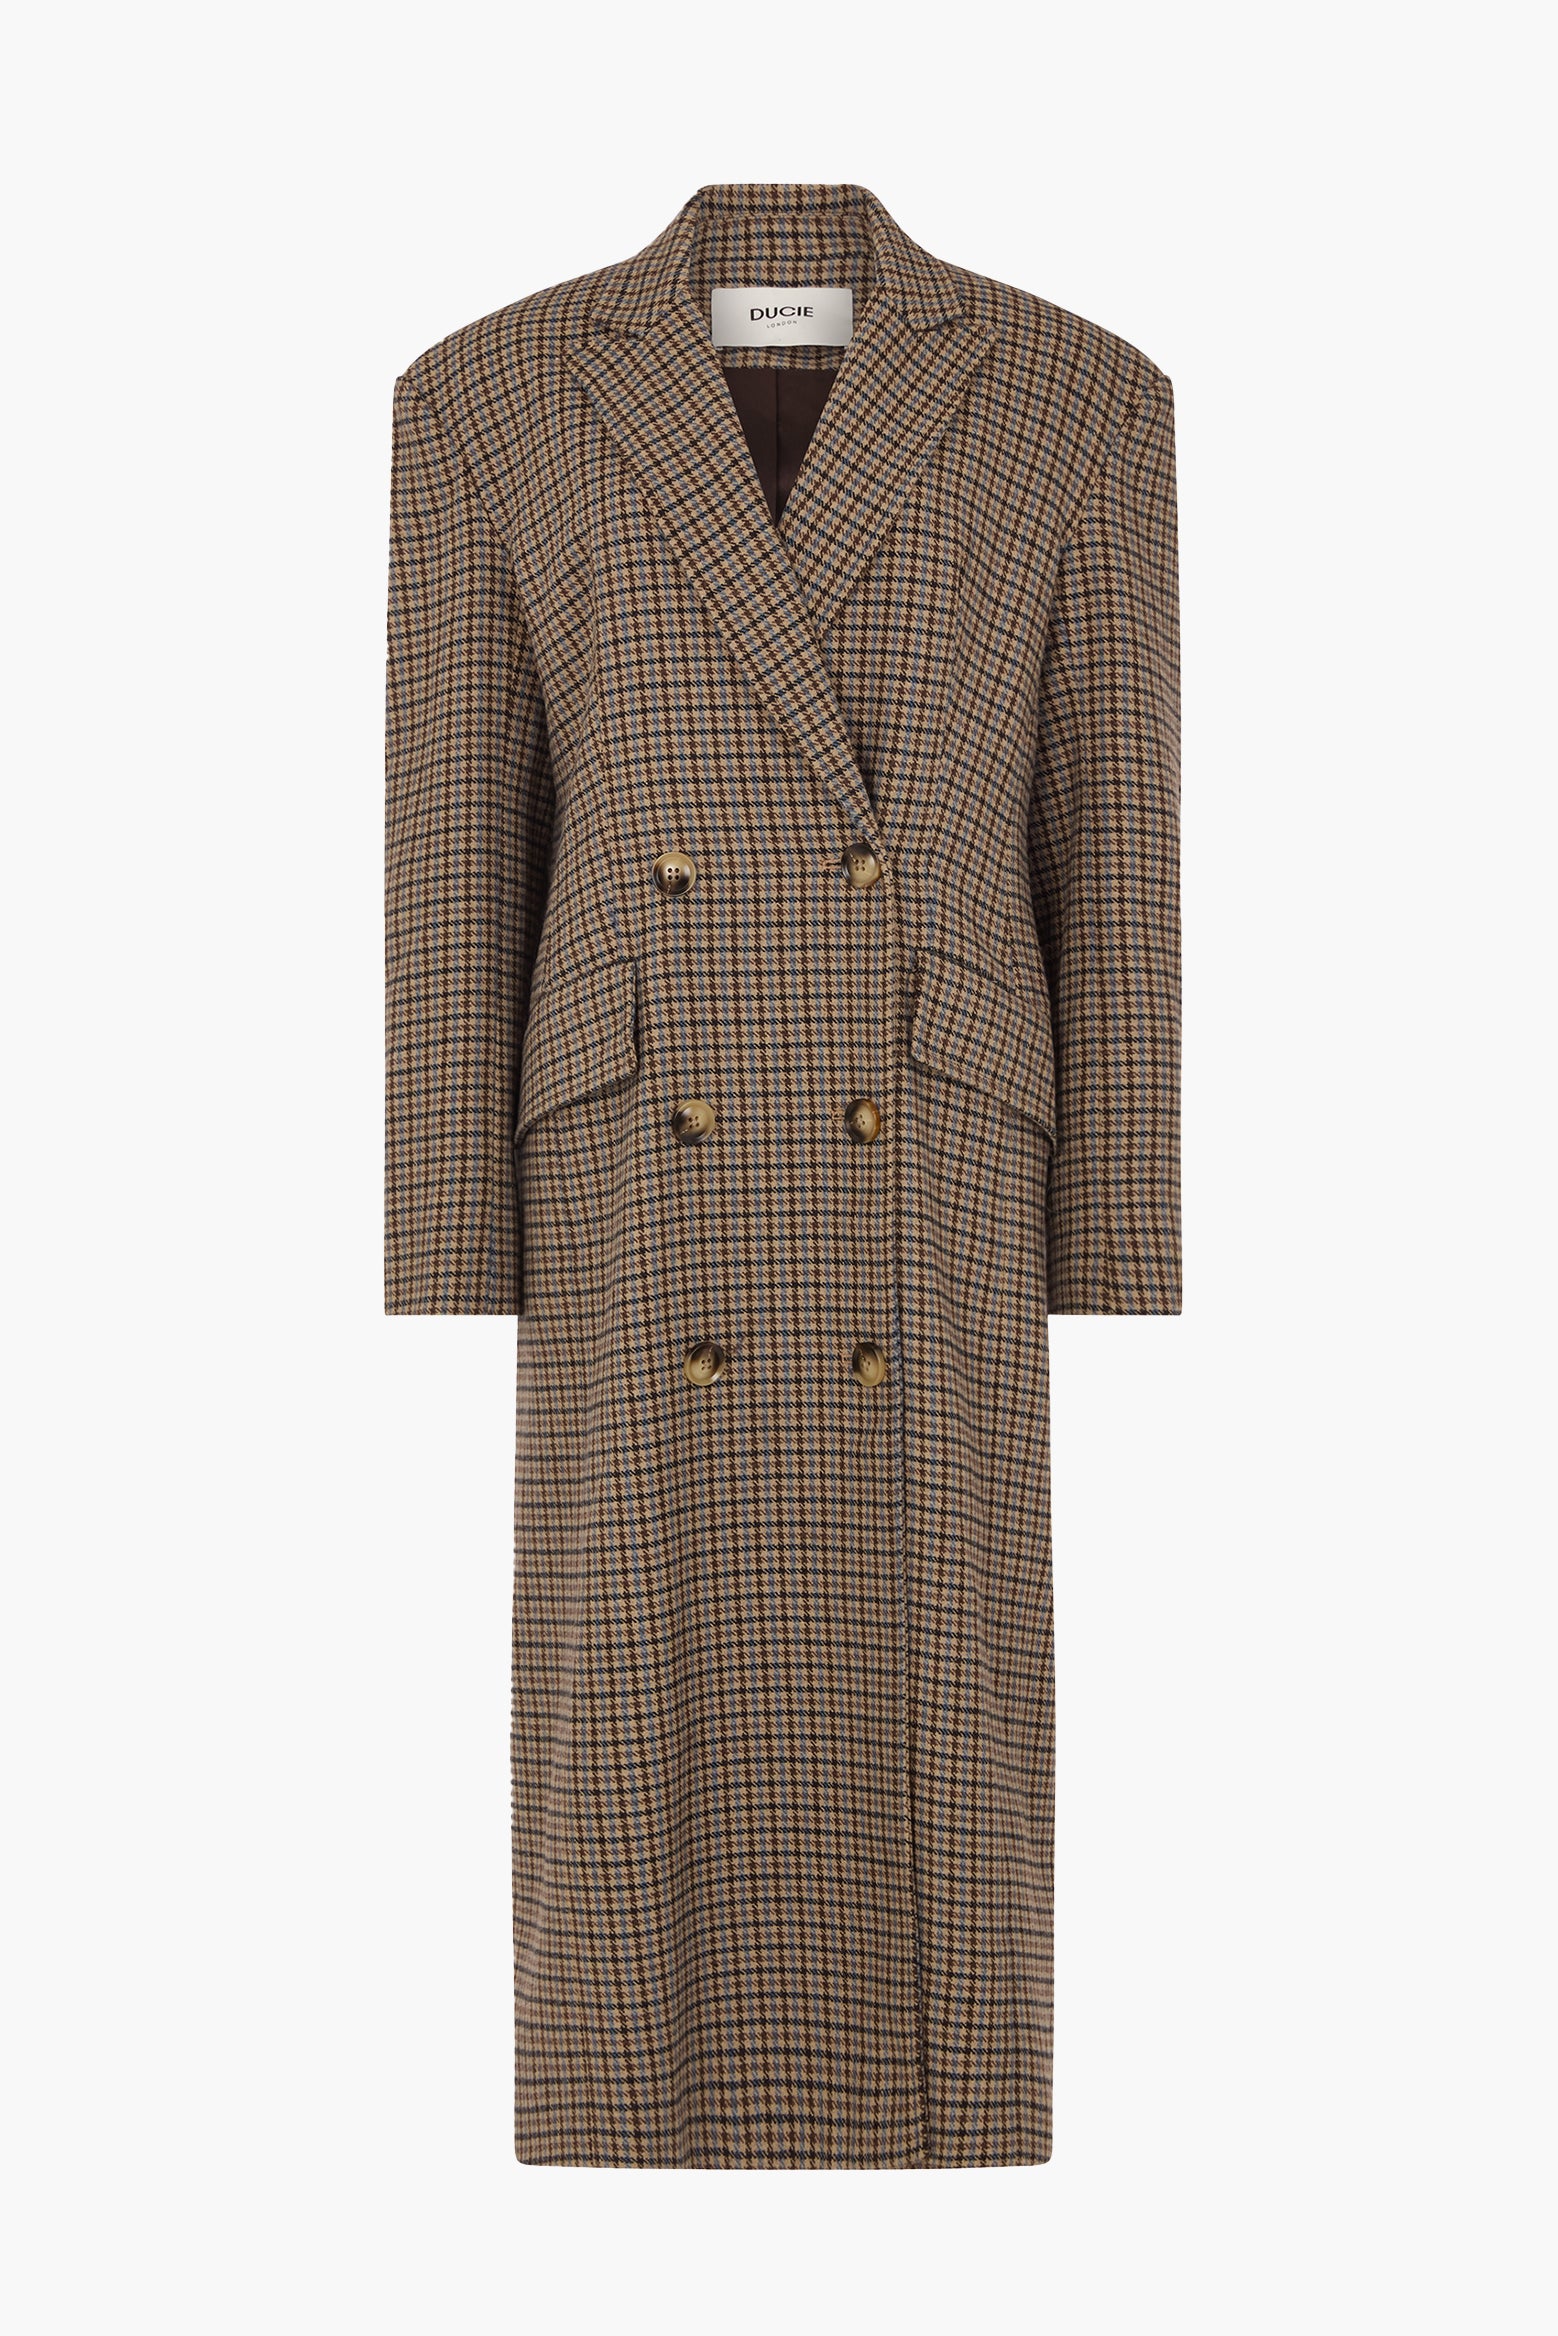 DUCIE LONDON Aggie Wool Coat in Grey Check available at The New Trend